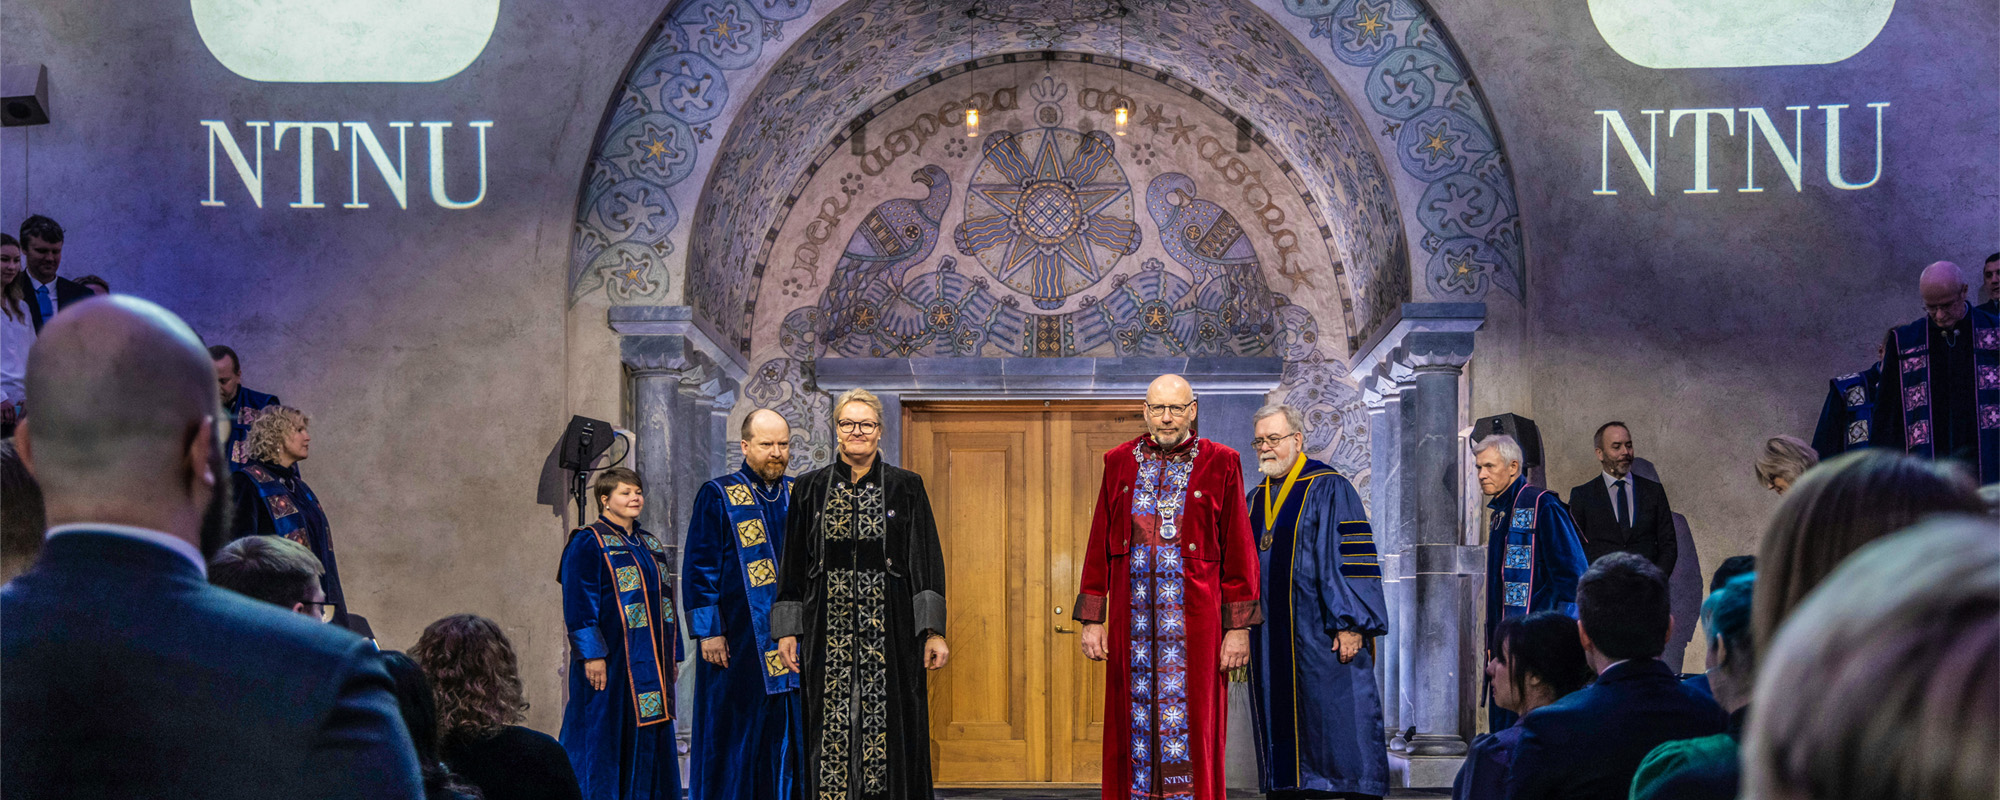 We see Rector Tor Grande, Pro-Rector Toril Hernes and the rest of the academic procession in the Main Building at Gløshaugen.